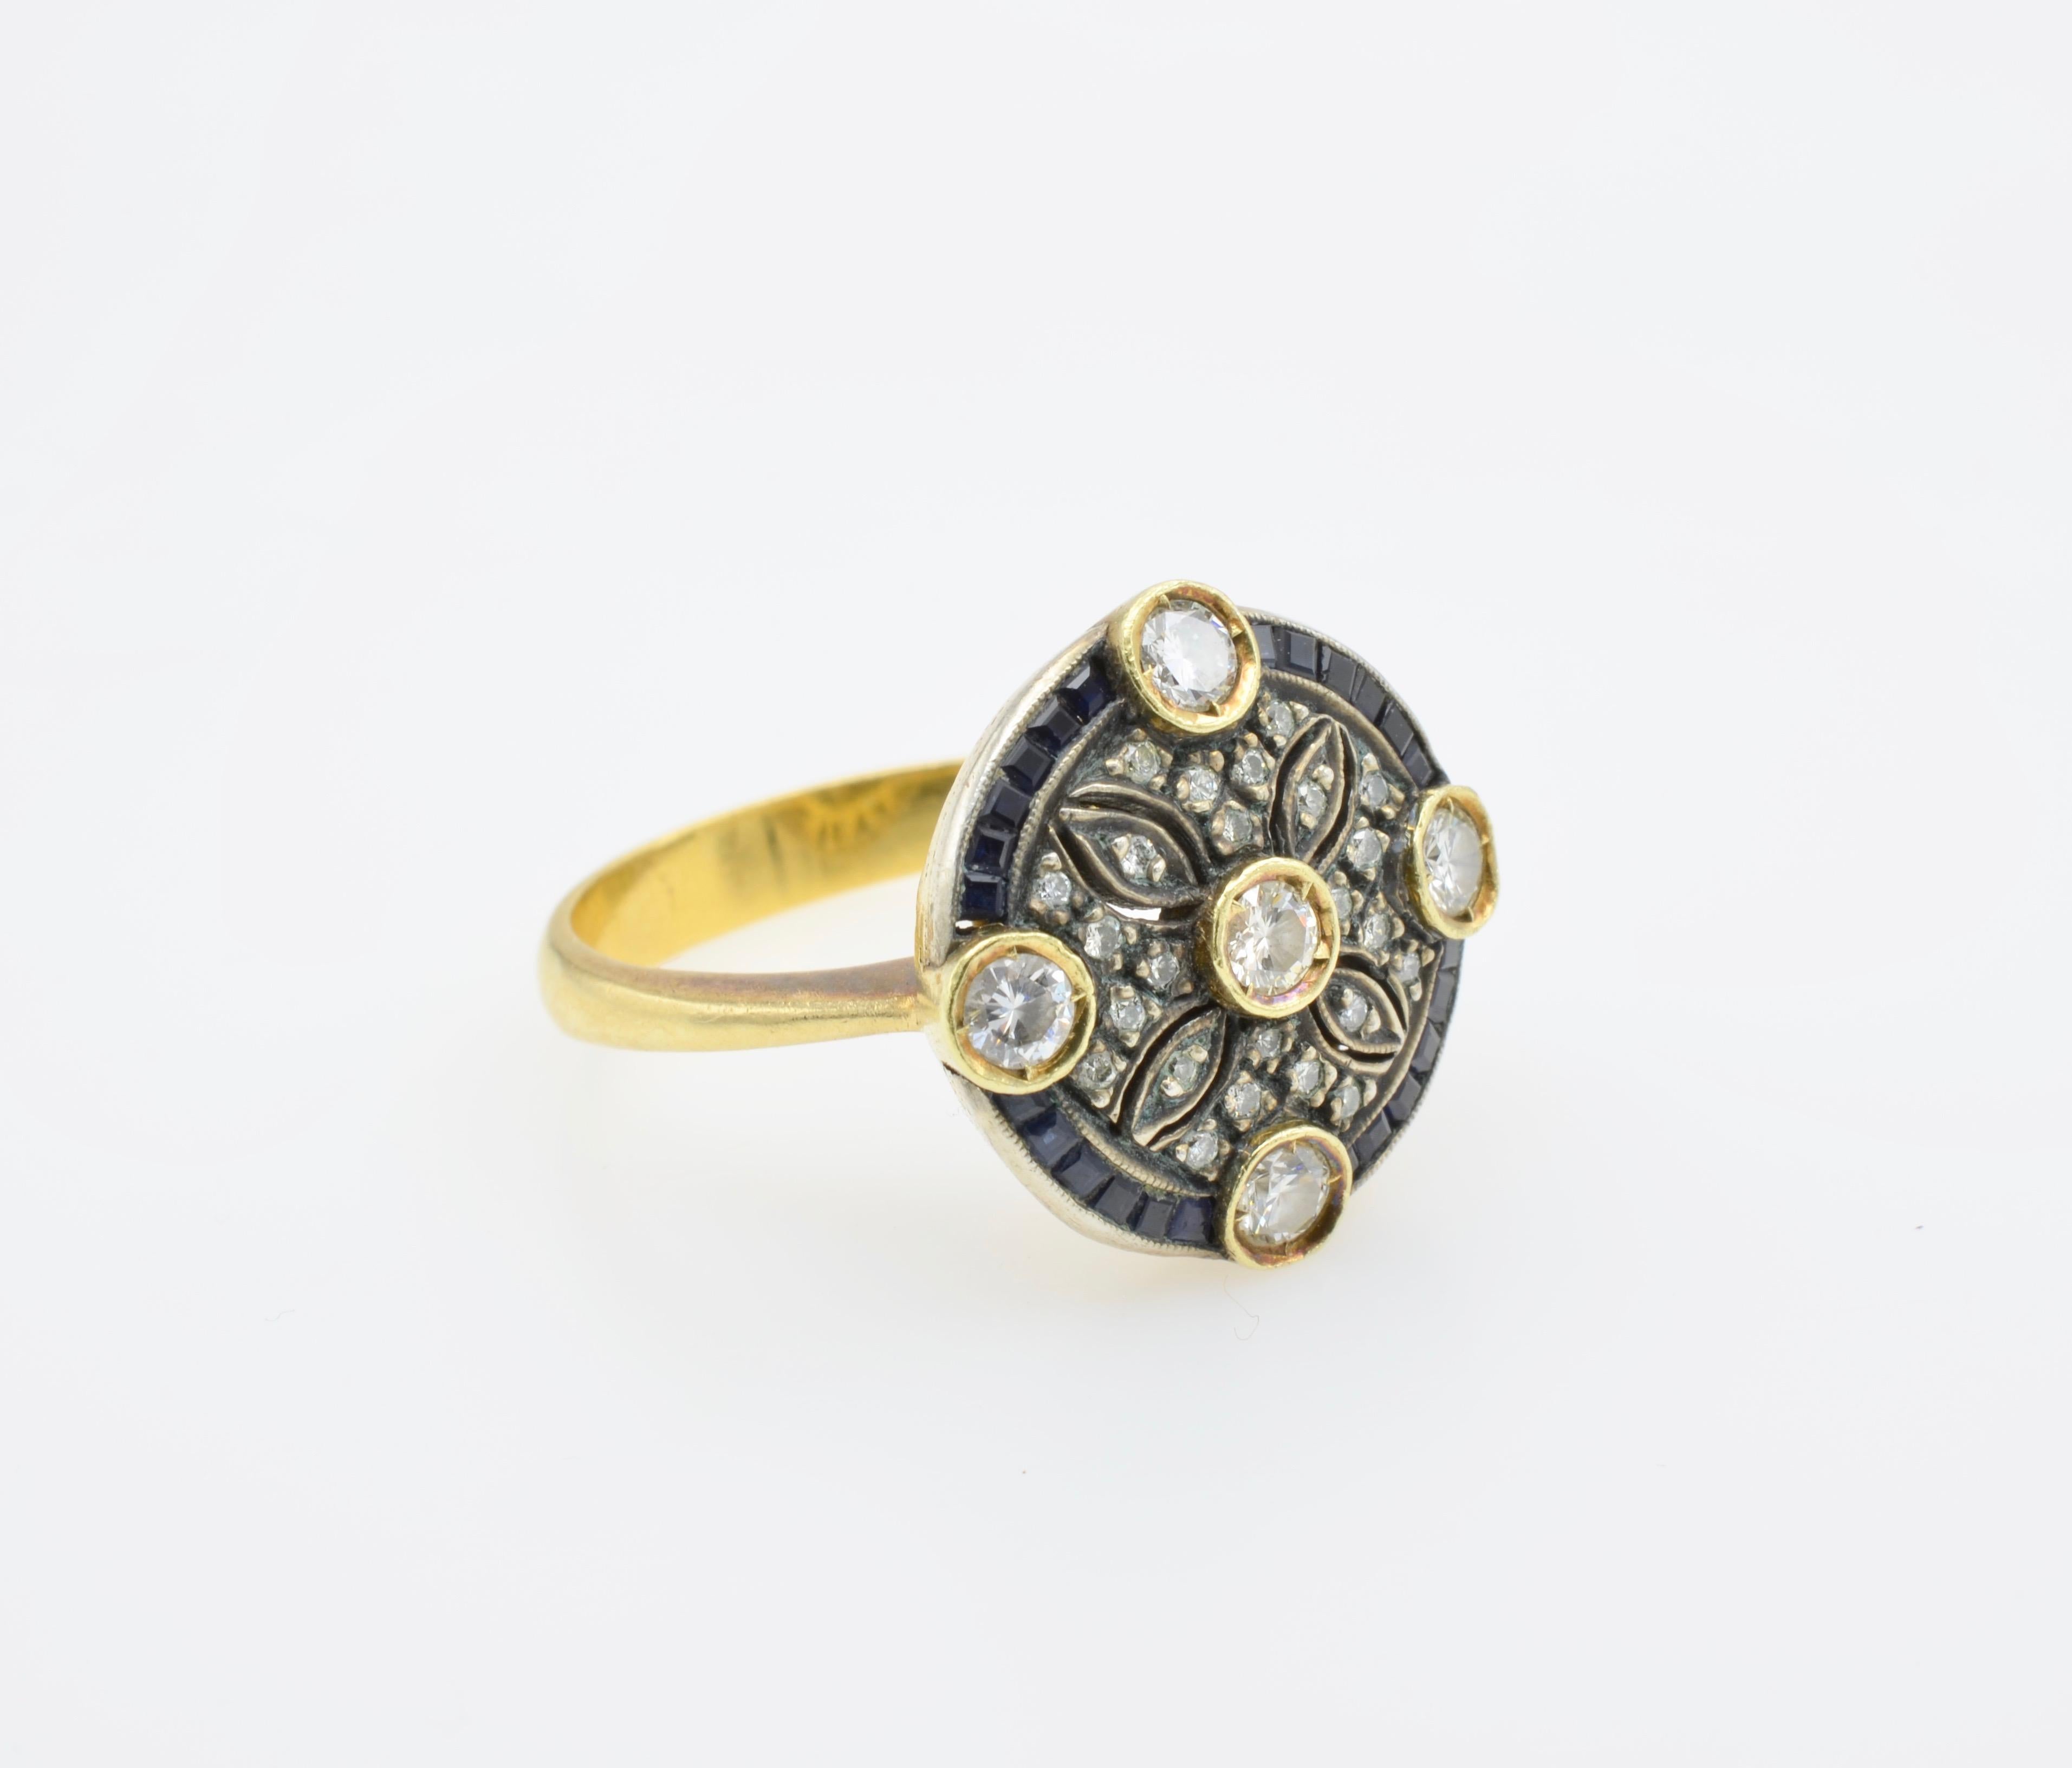 Medieval Diamond Sapphire Engagement Ring Rosace Filigree Gold